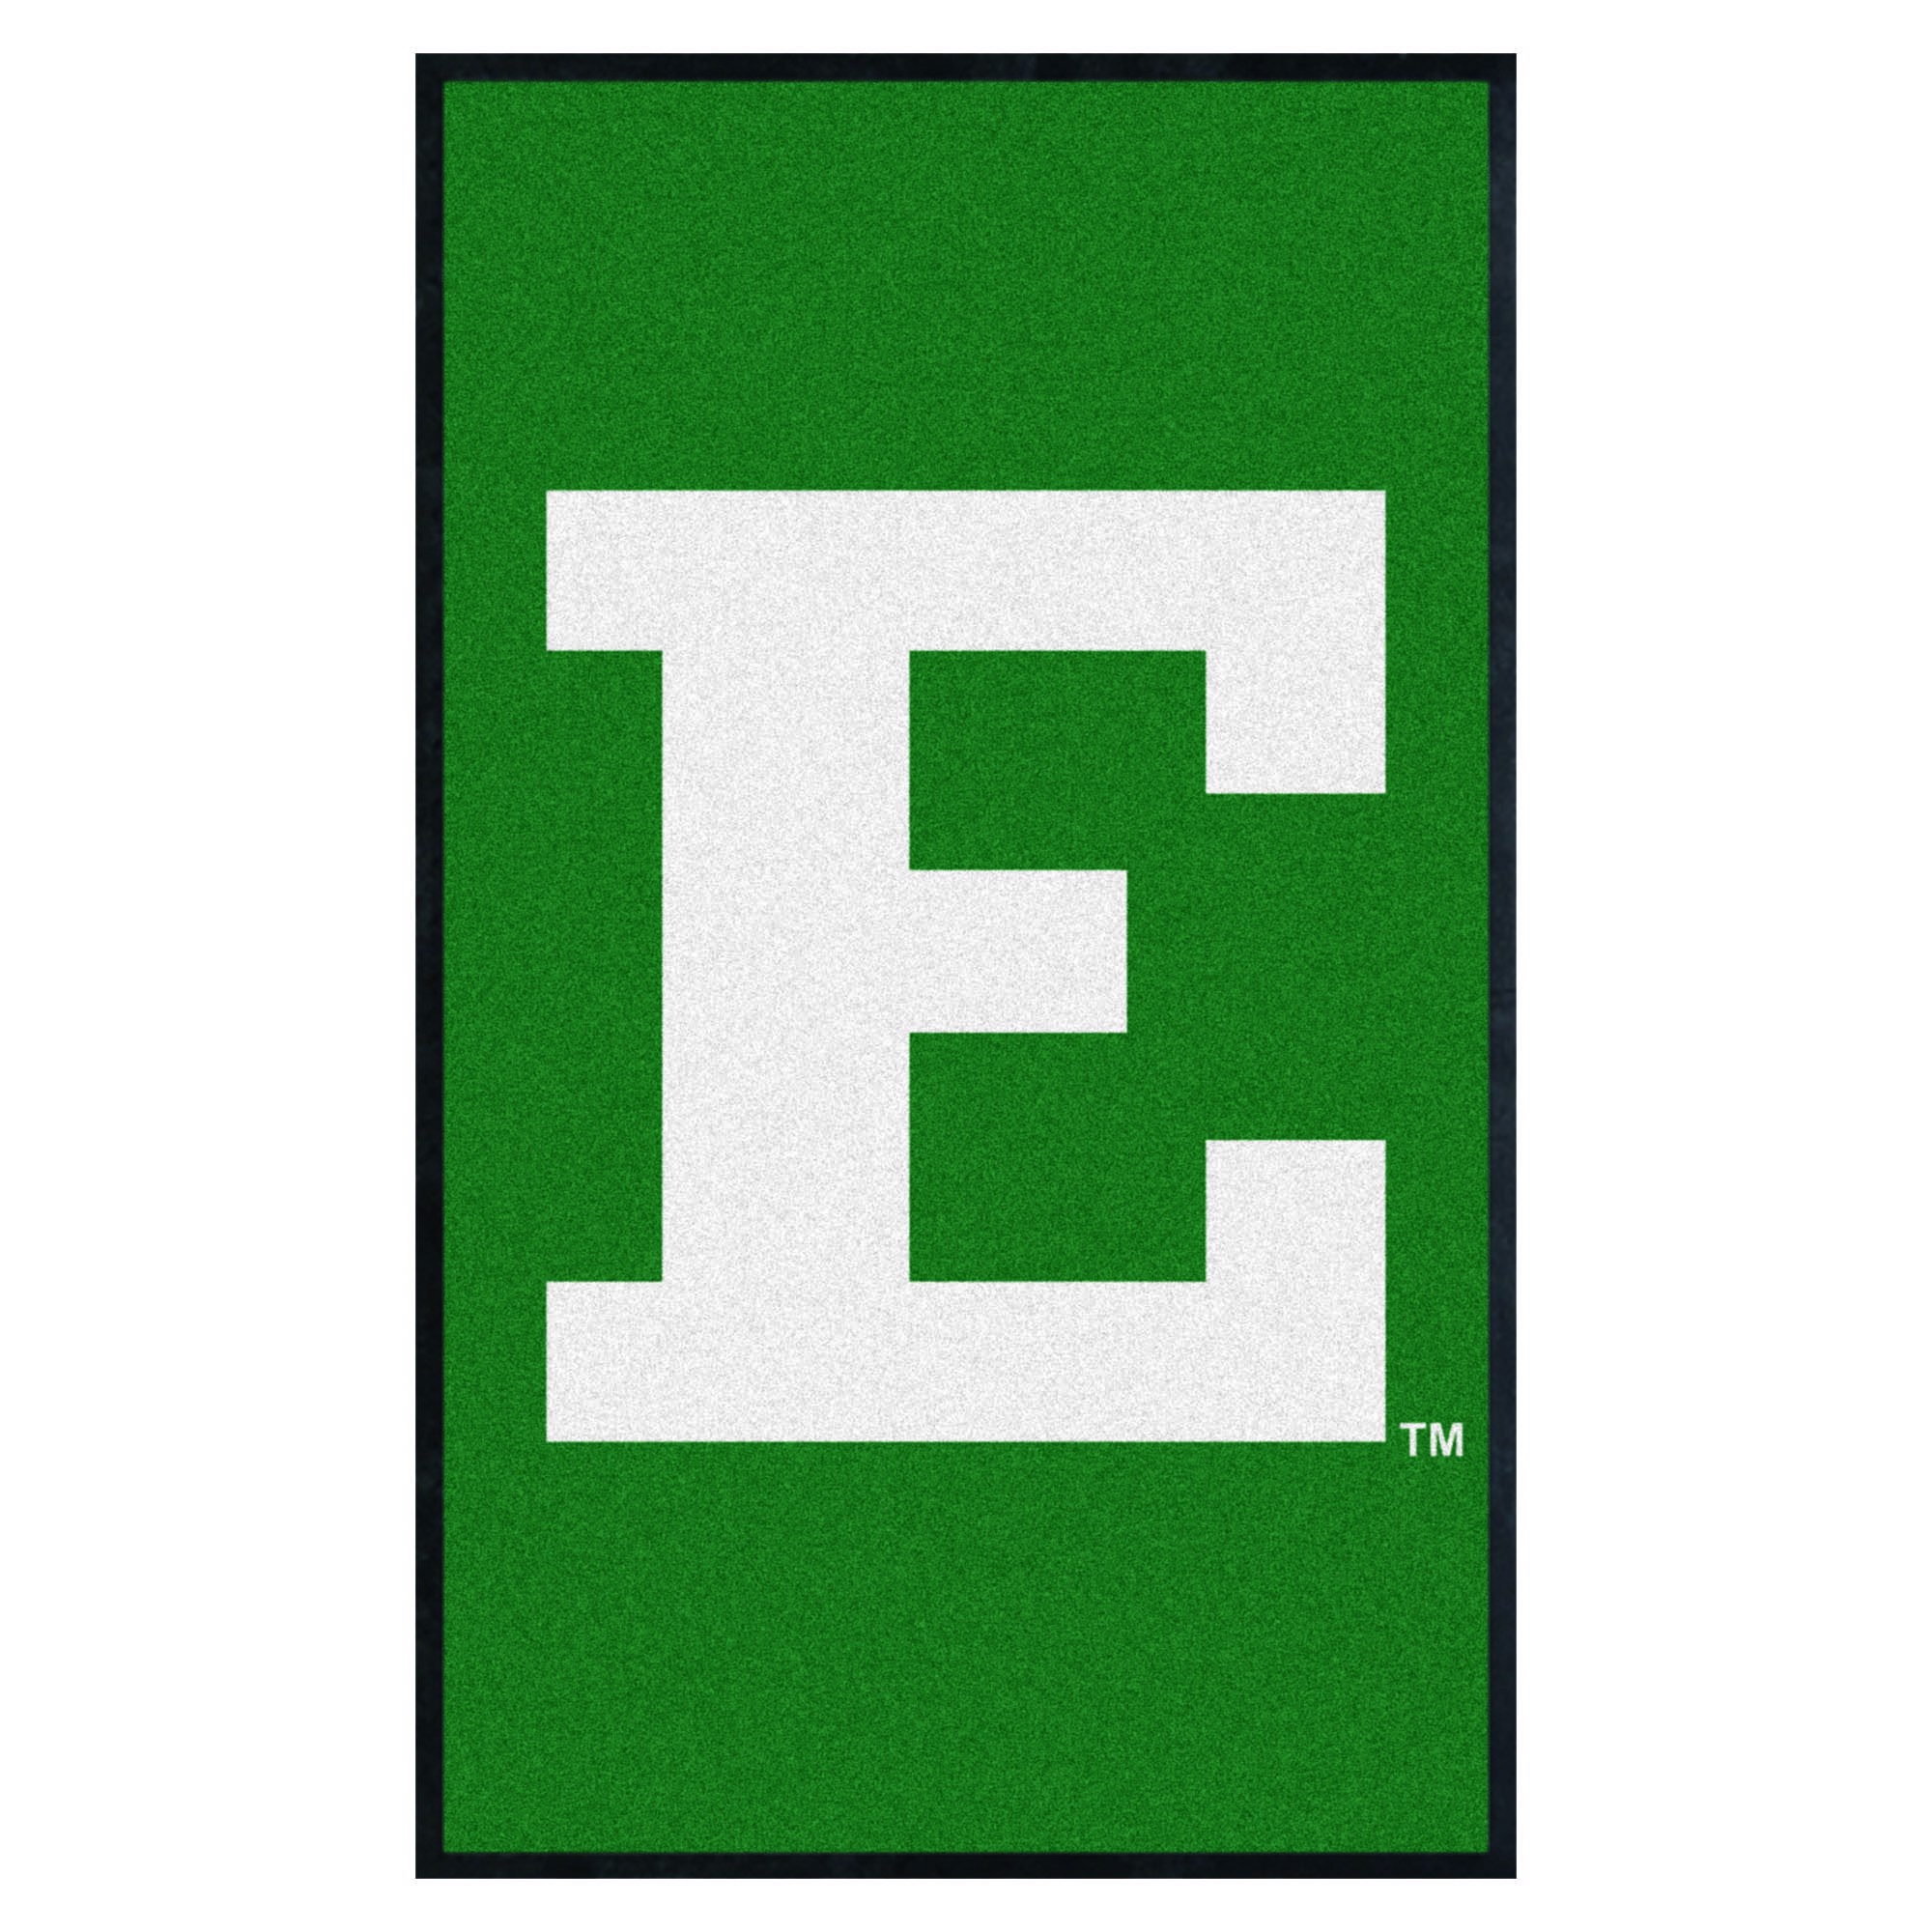 https://www.fanmats.com/images/thumbs/0135416_eastern-michigan-3x5-high-traffic-mat-with-durable-rubber-backing.jpeg